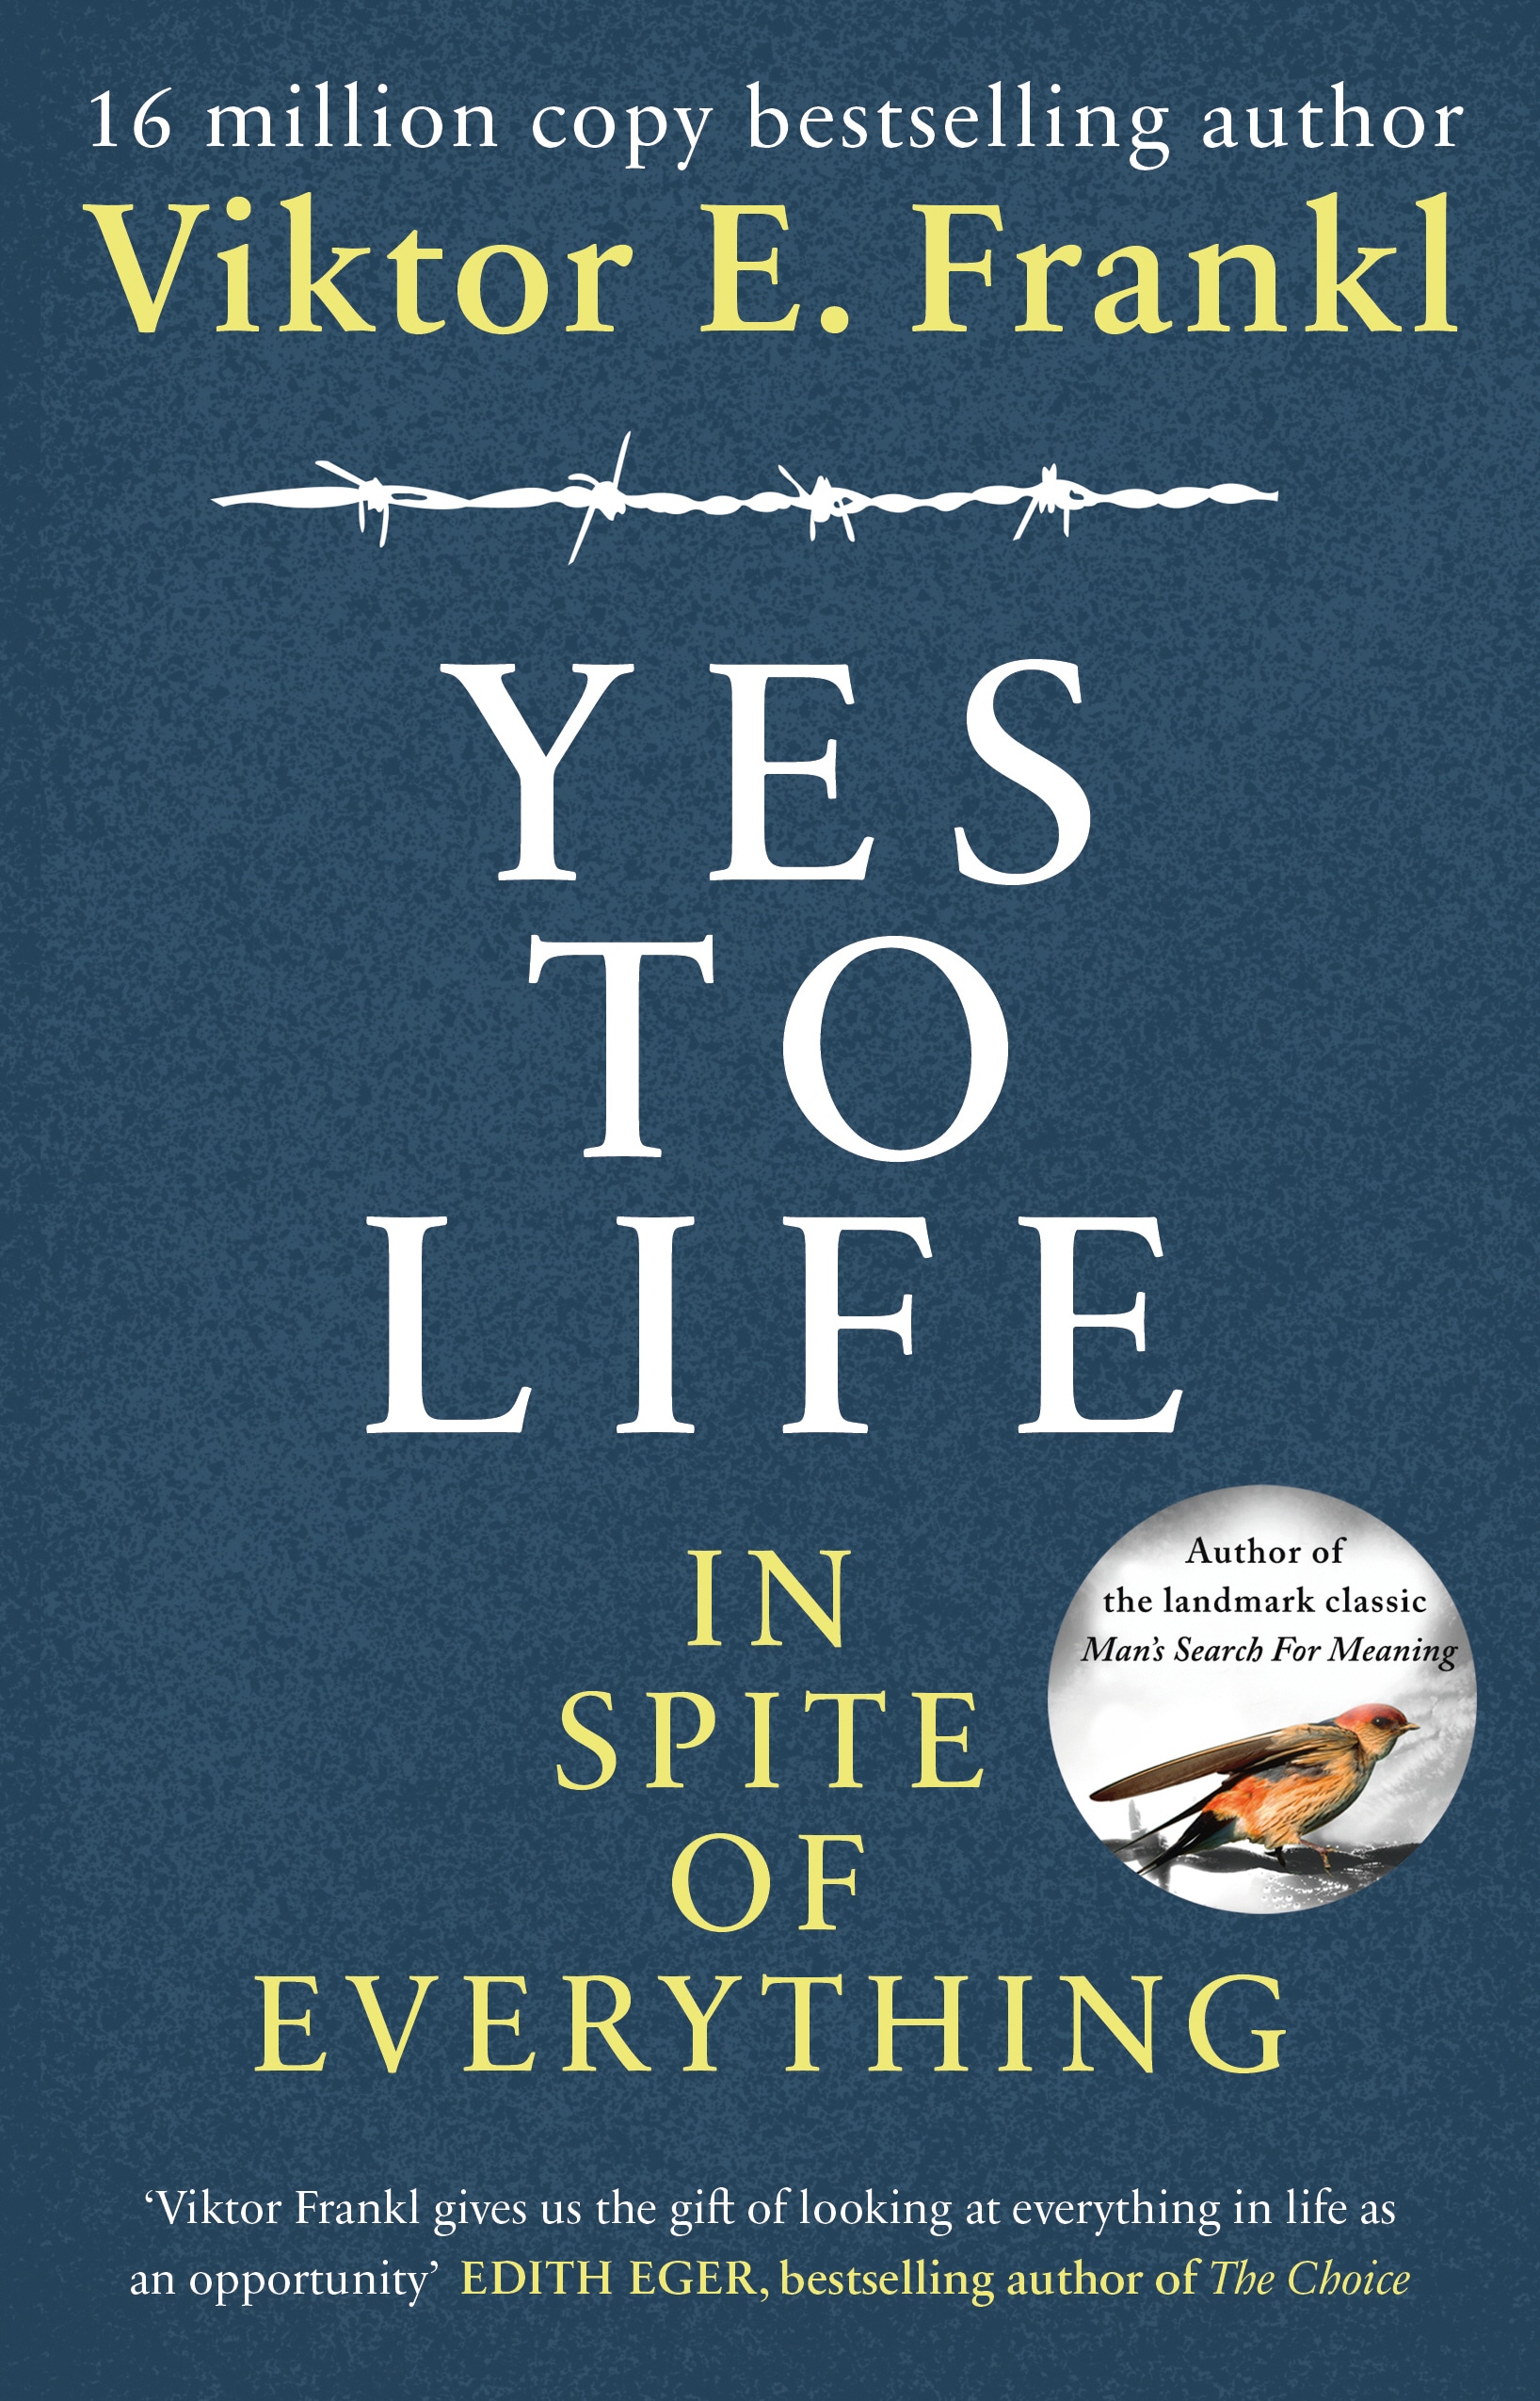 Book “Yes To Life In Spite of Everything” by Viktor E Frankl — May 7, 2020